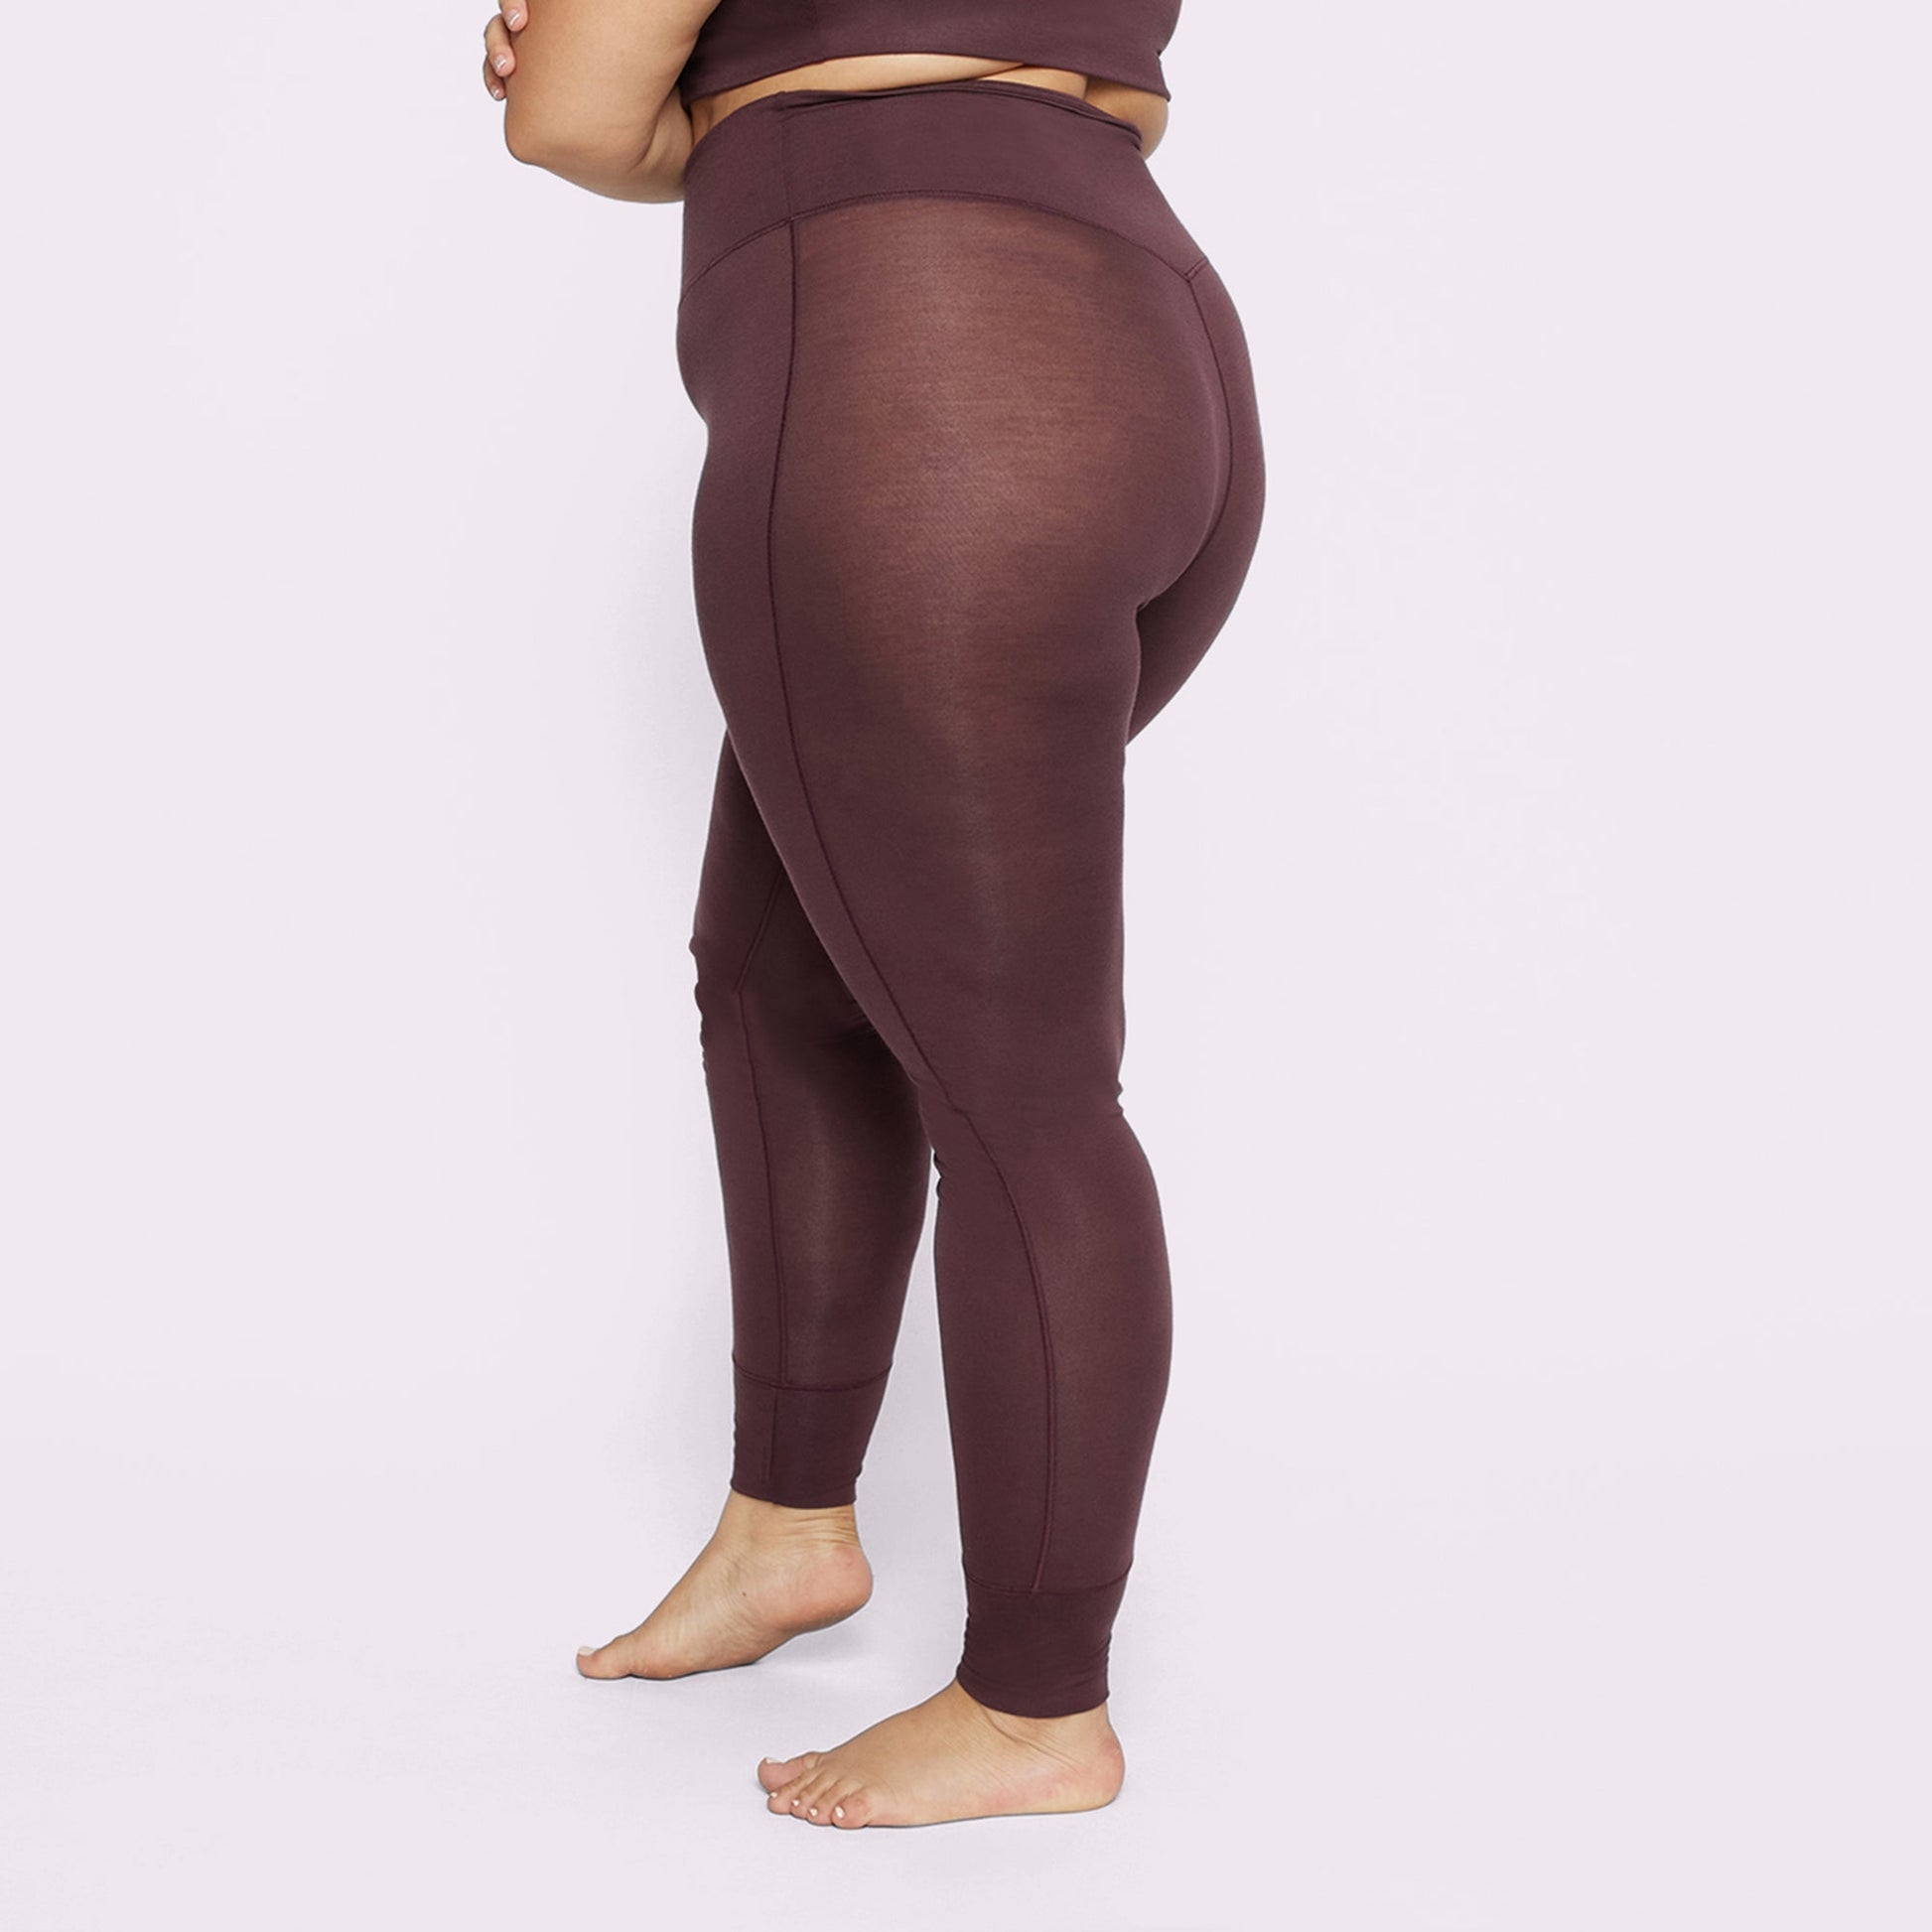 SuperSoft Warm Thermal Leggings